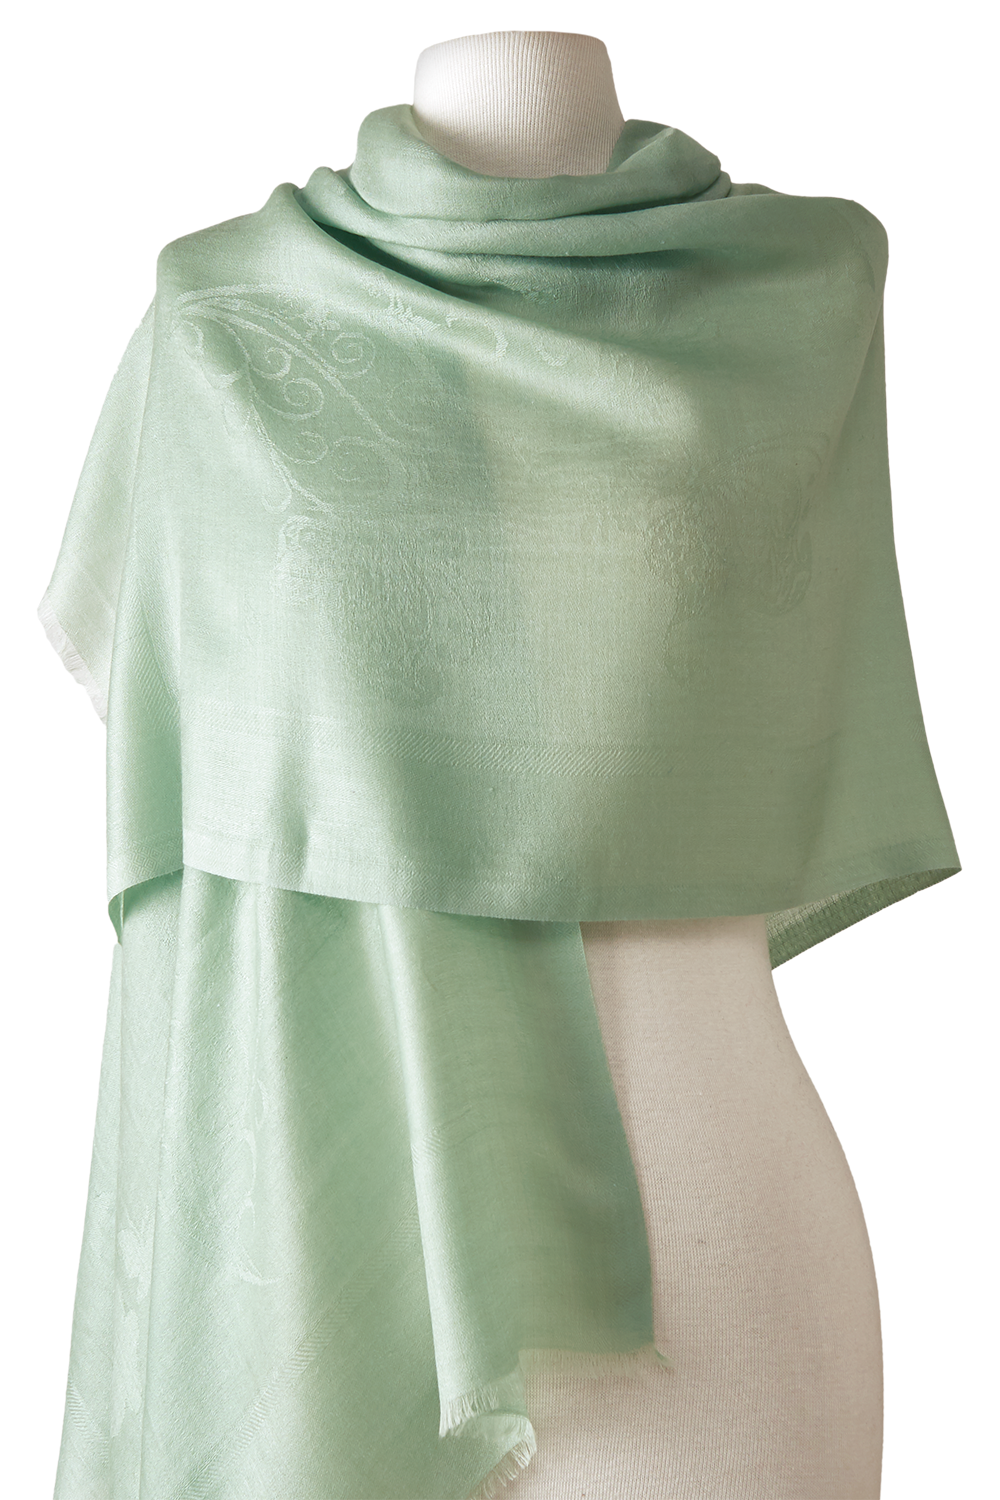 Cashmere Baby mint 